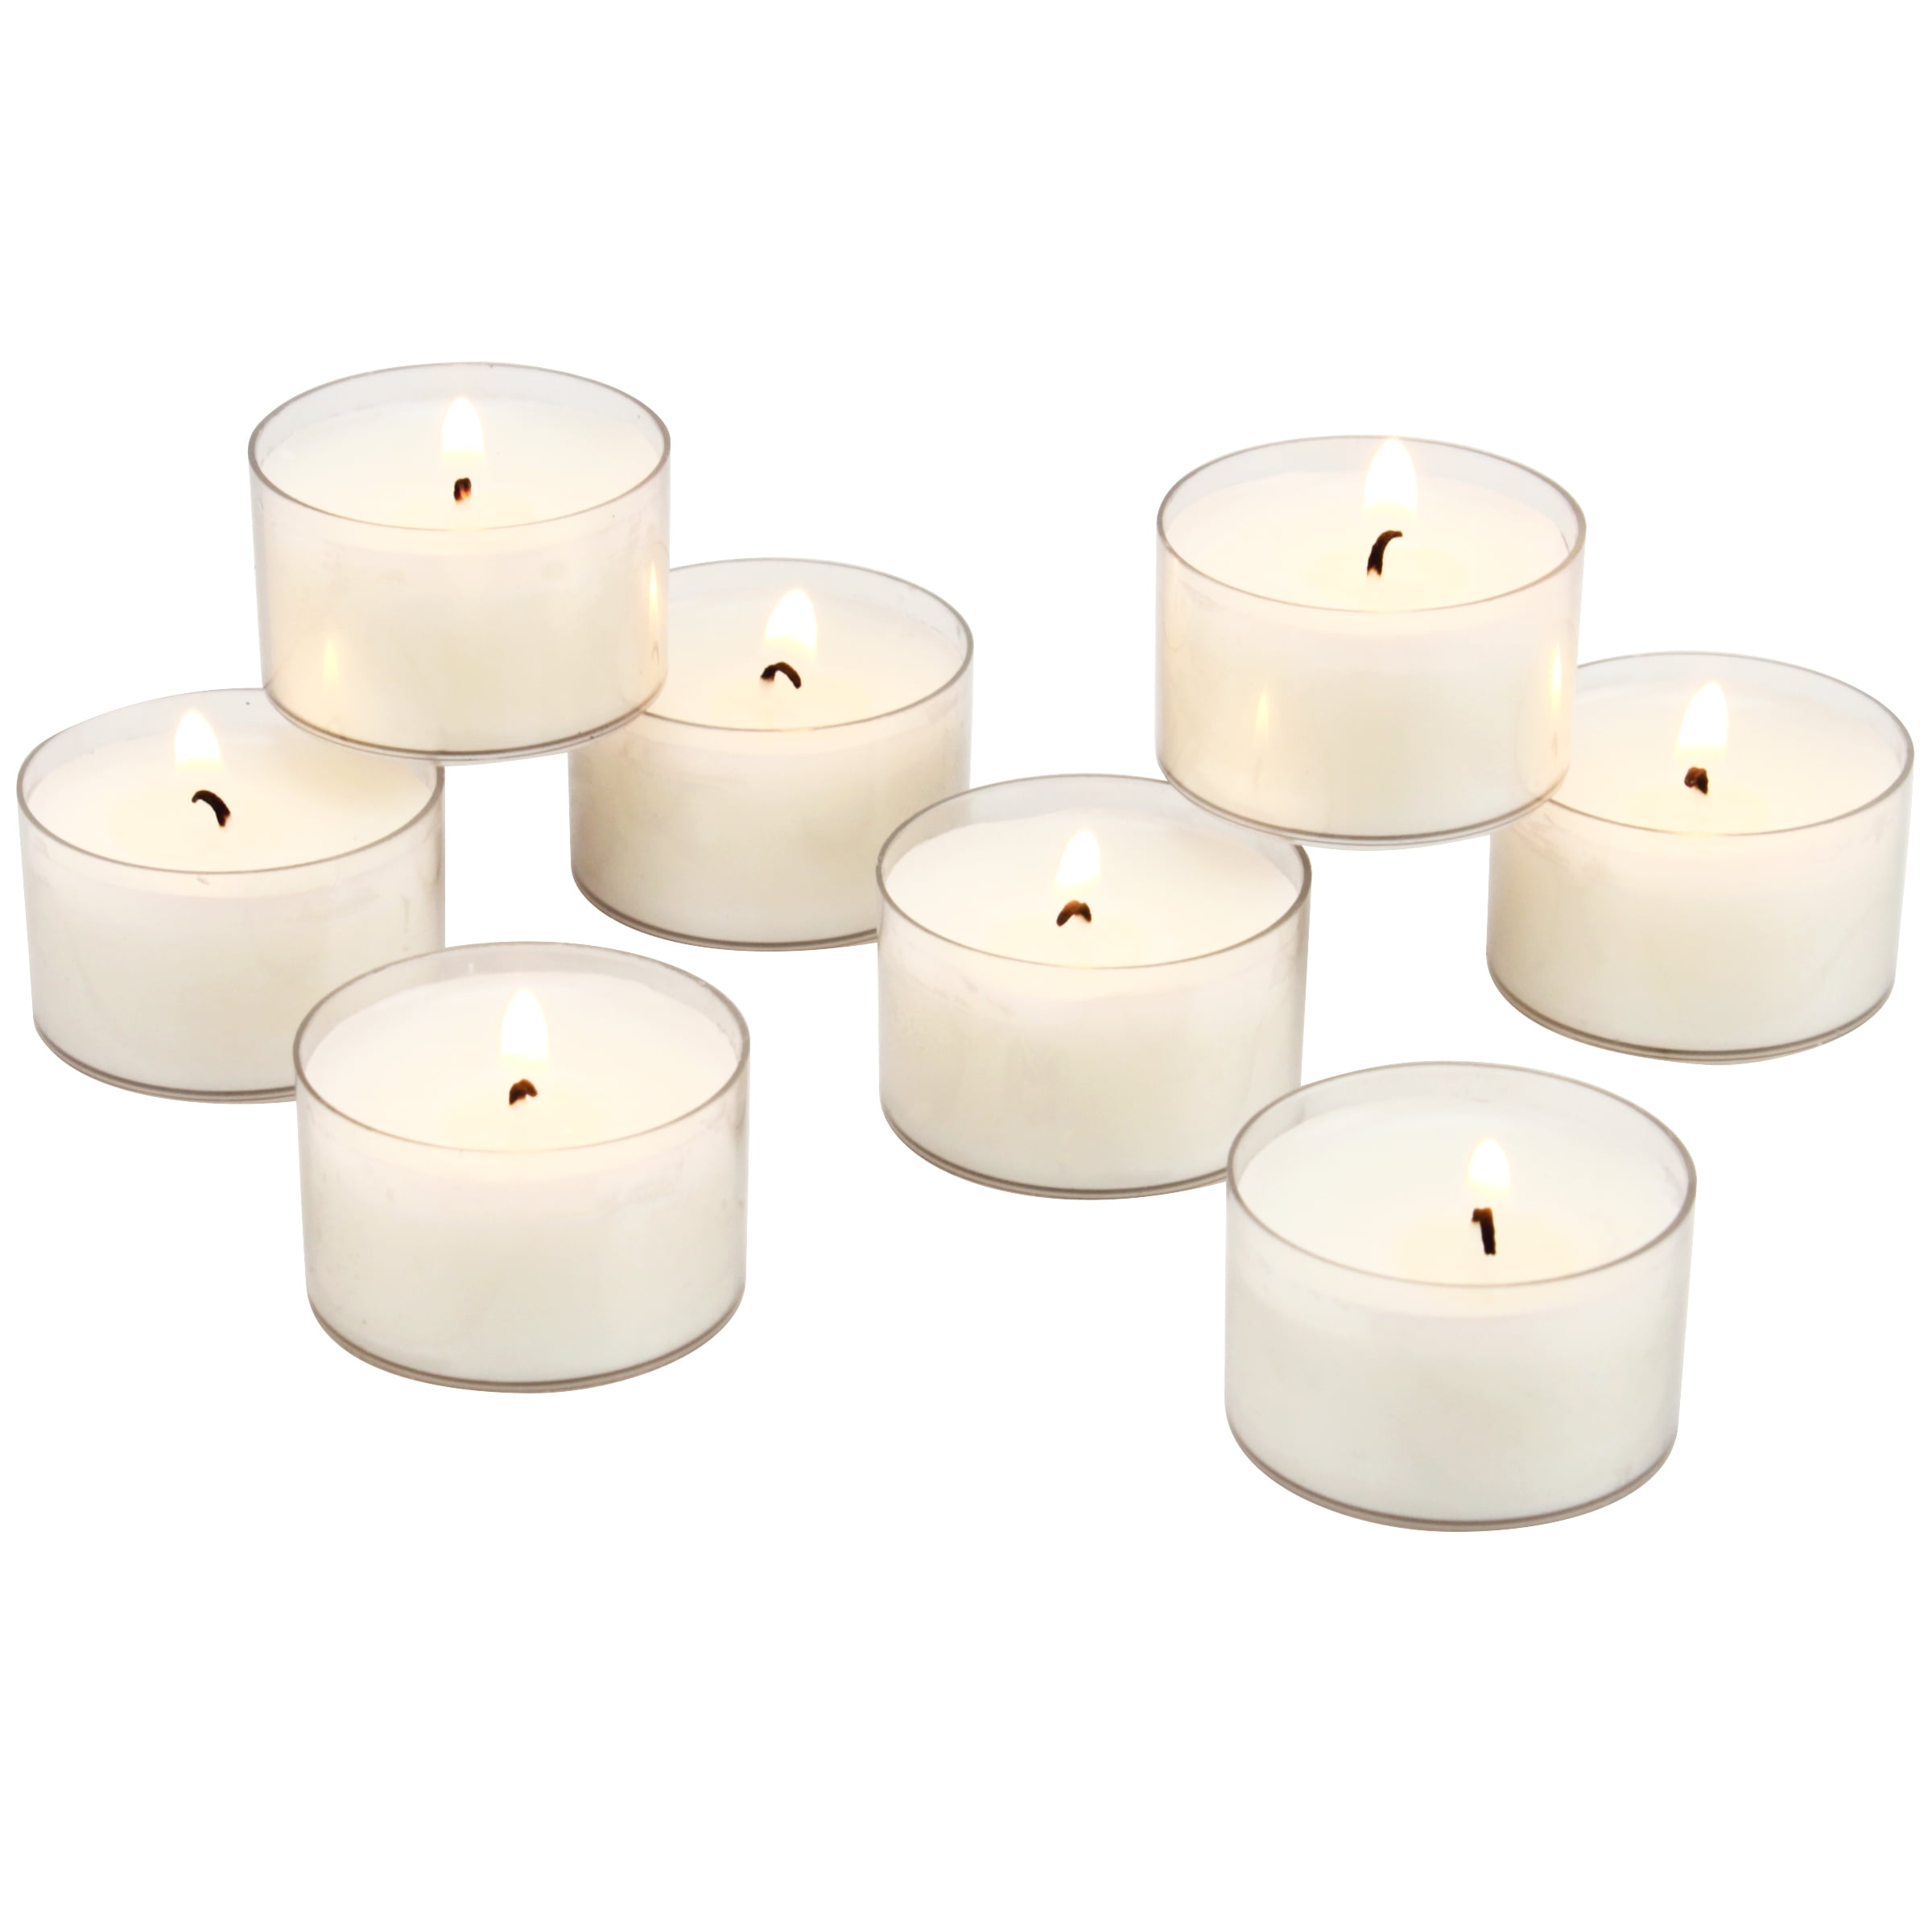 5 SMALL WHITE SCROLL BOXES WEDDINGS CANDLES GIFTS 